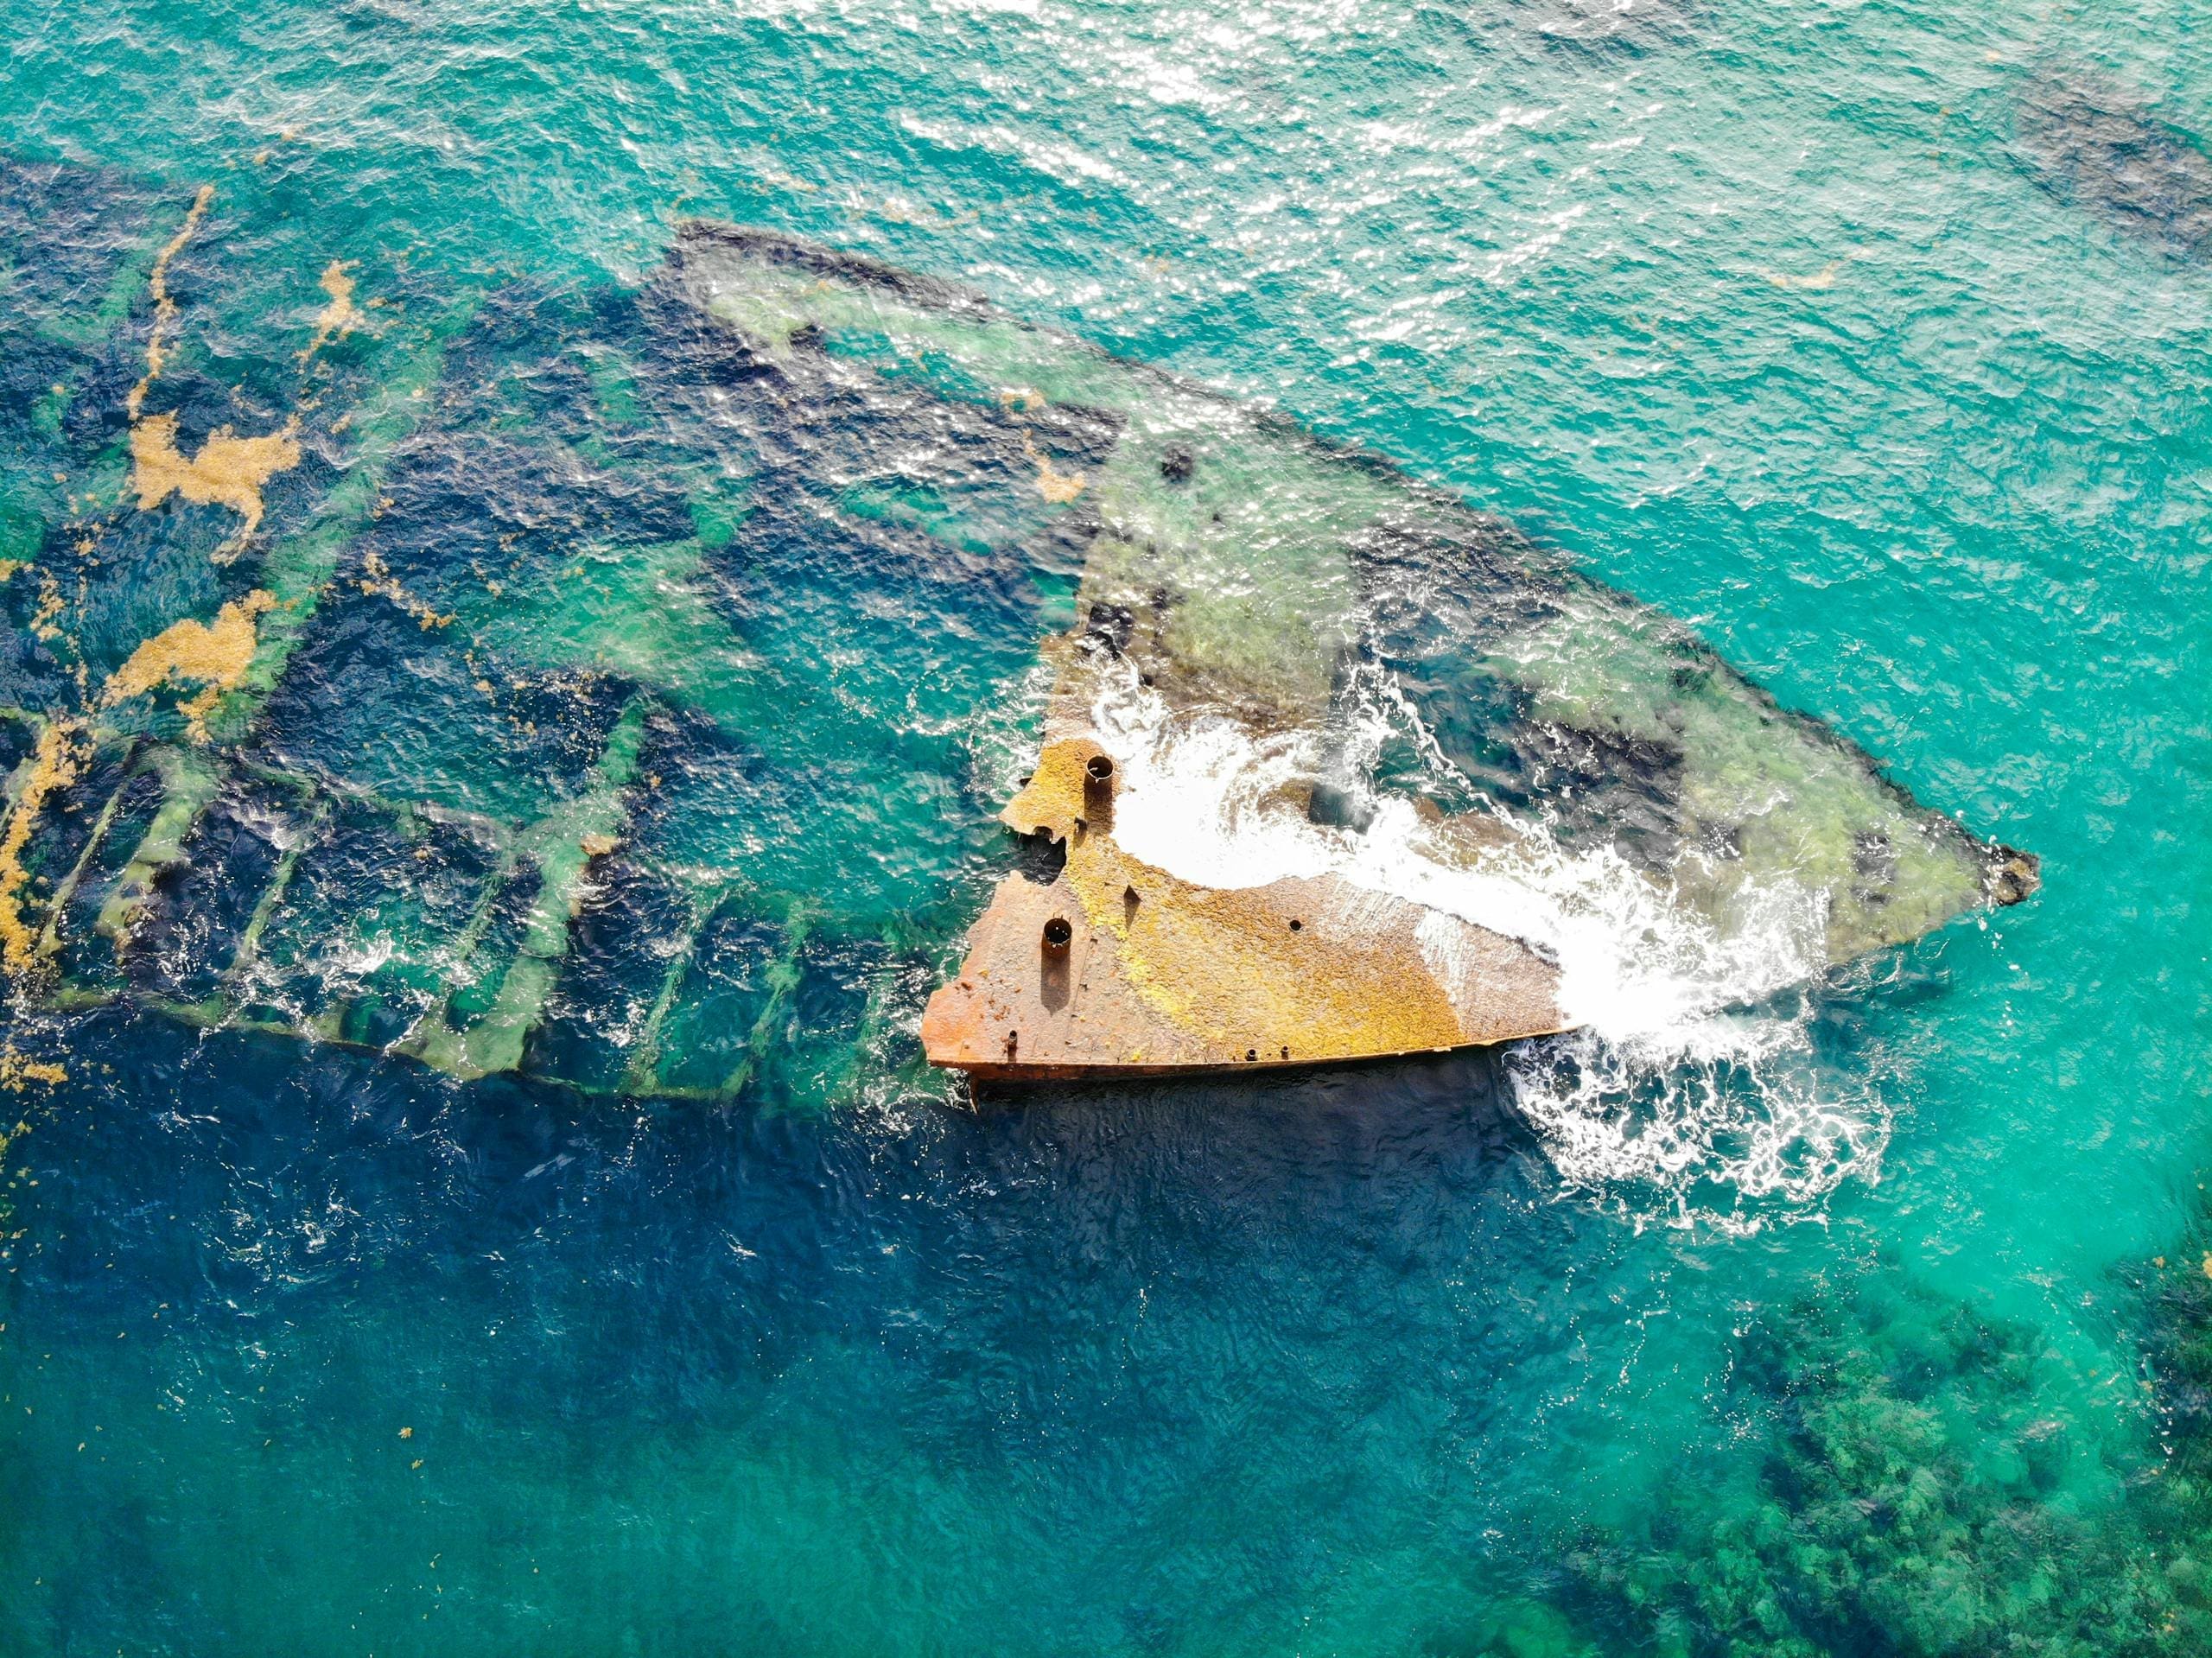 Aerial View of Shipwreck in the Middle of Ocean